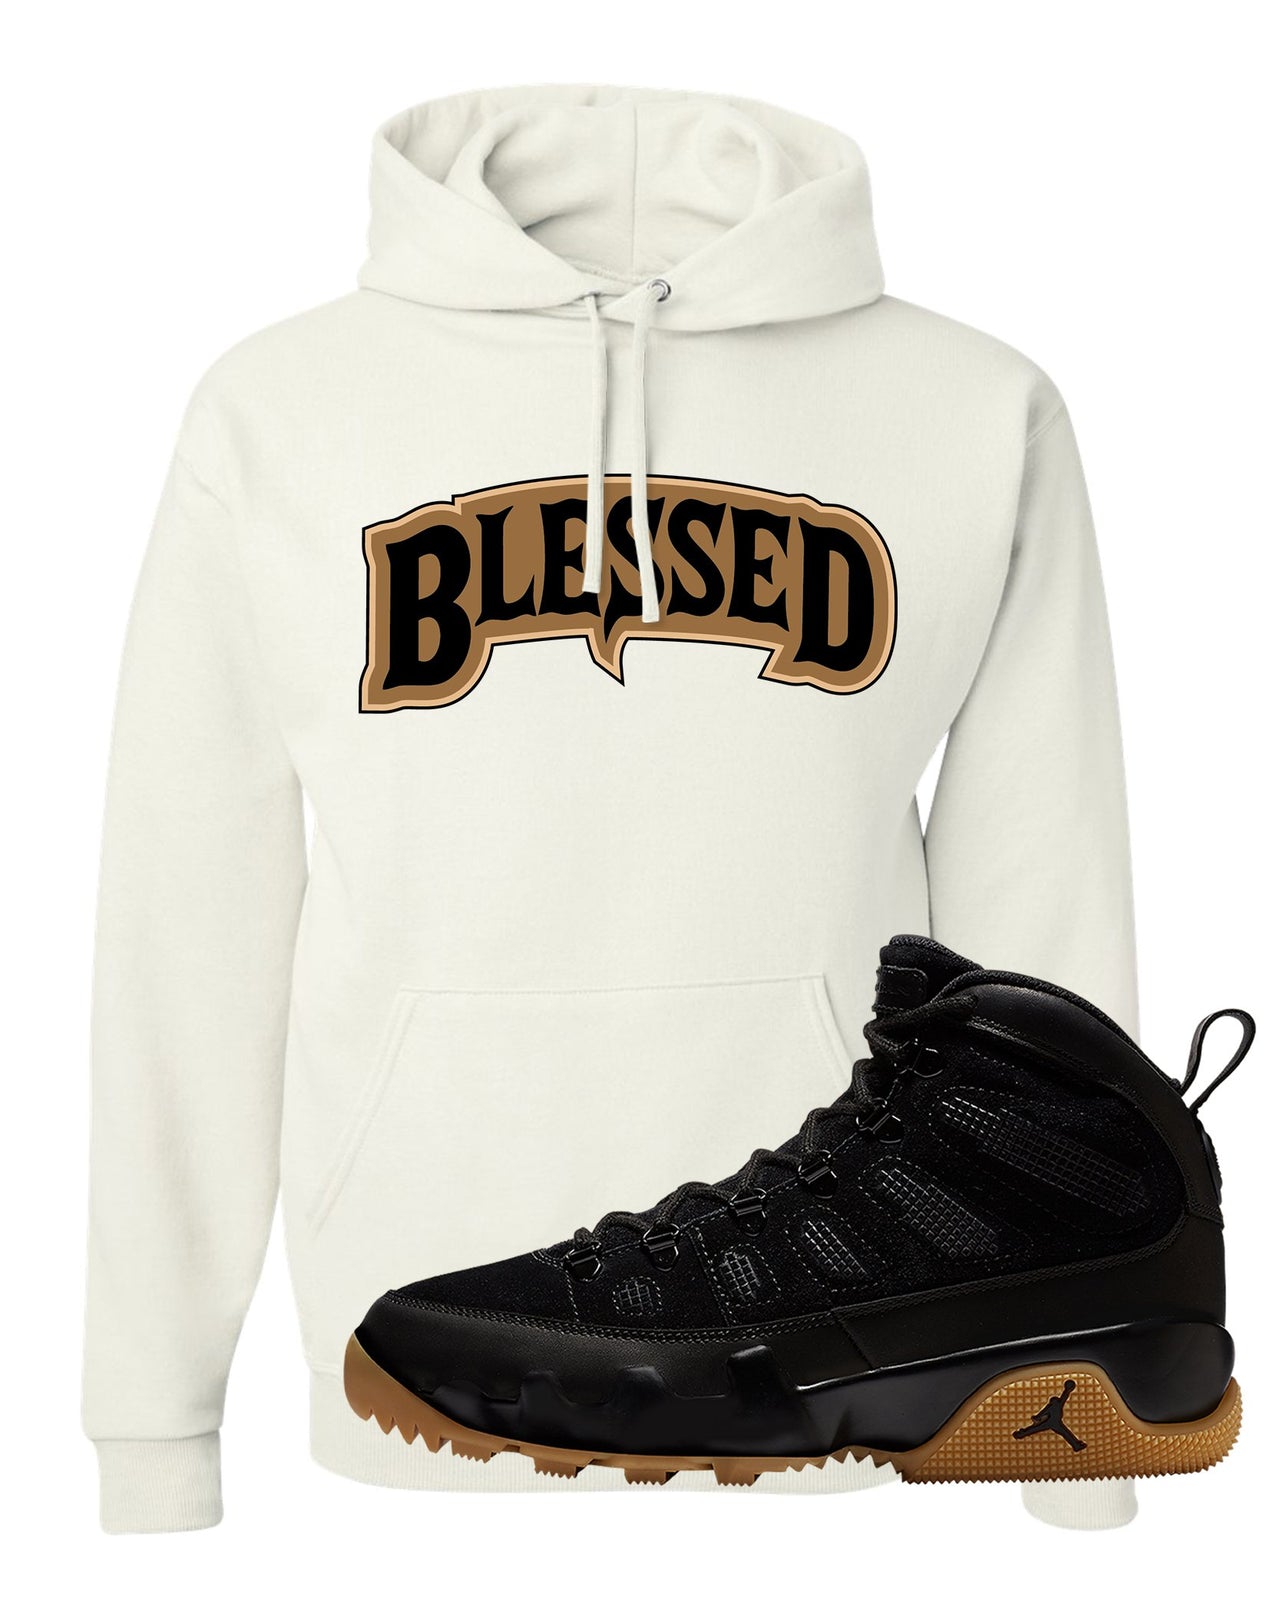 NRG Black Gum Boot 9s Hoodie | Blessed Arch, White